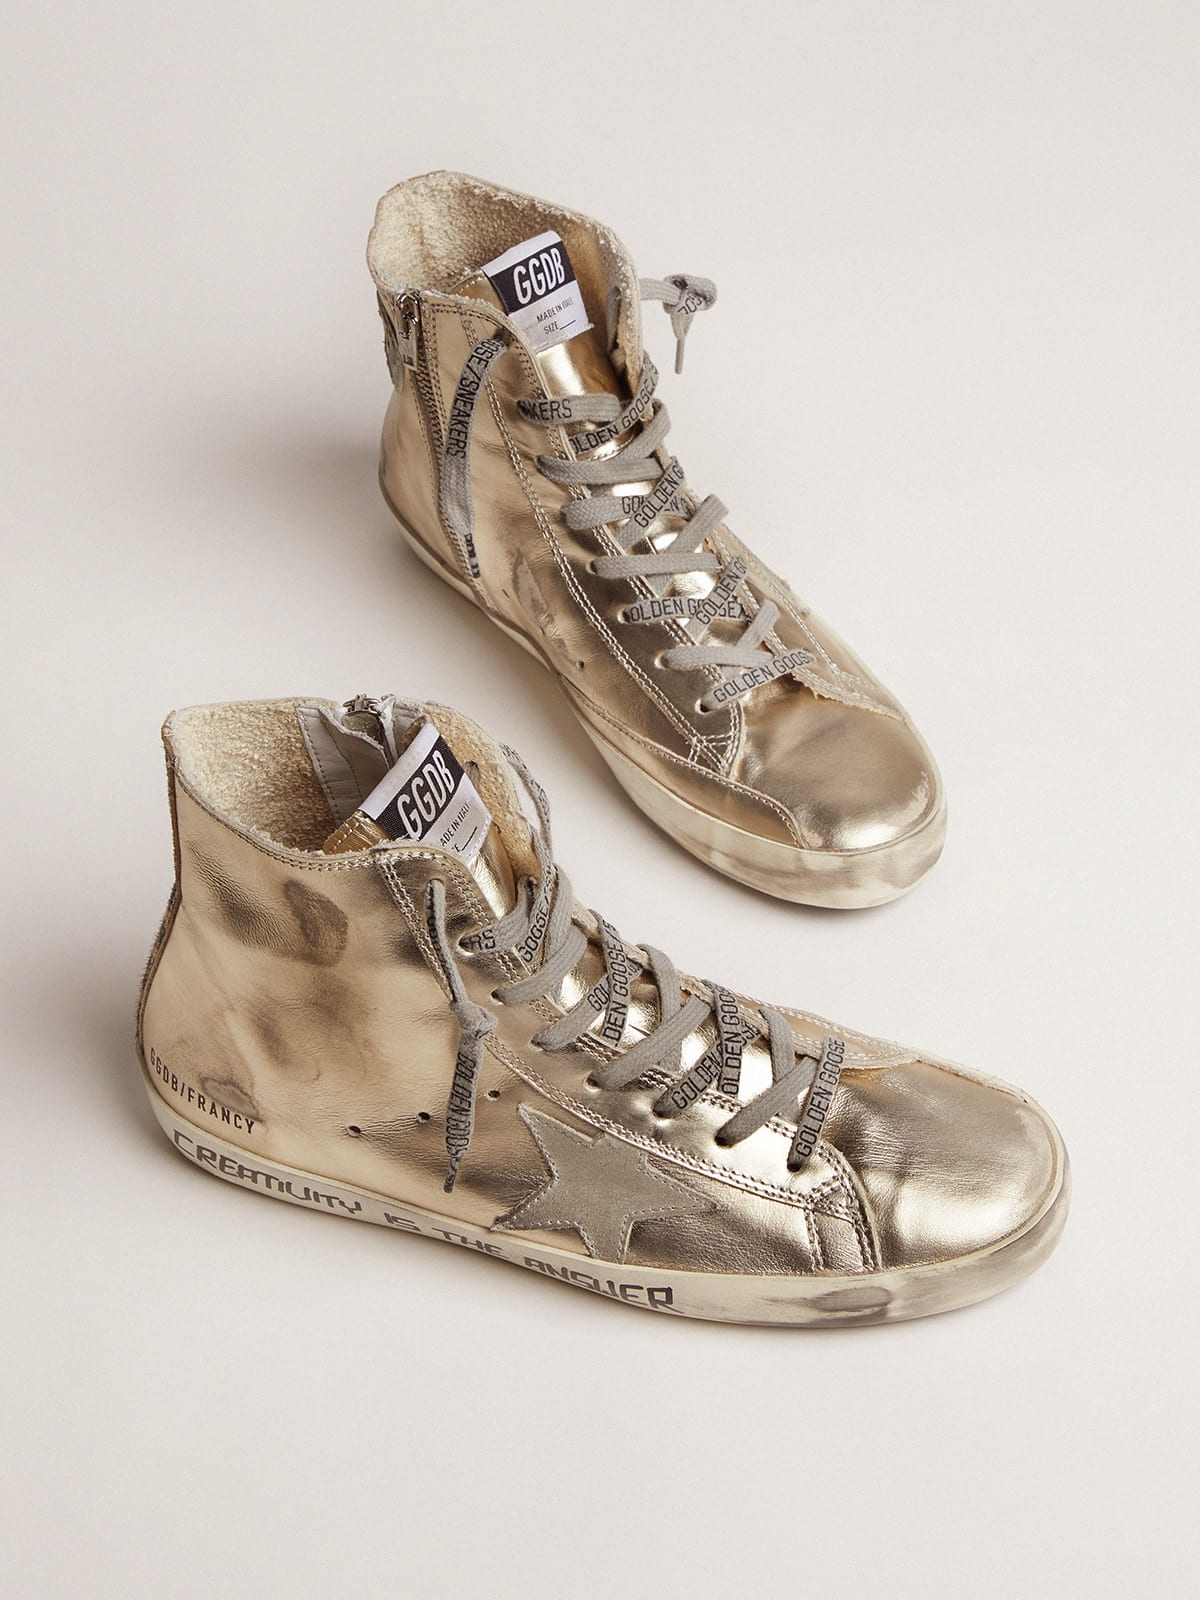 Gold Francy sneakers with handwritten lettering and leopard-print detail |  Golden Goose